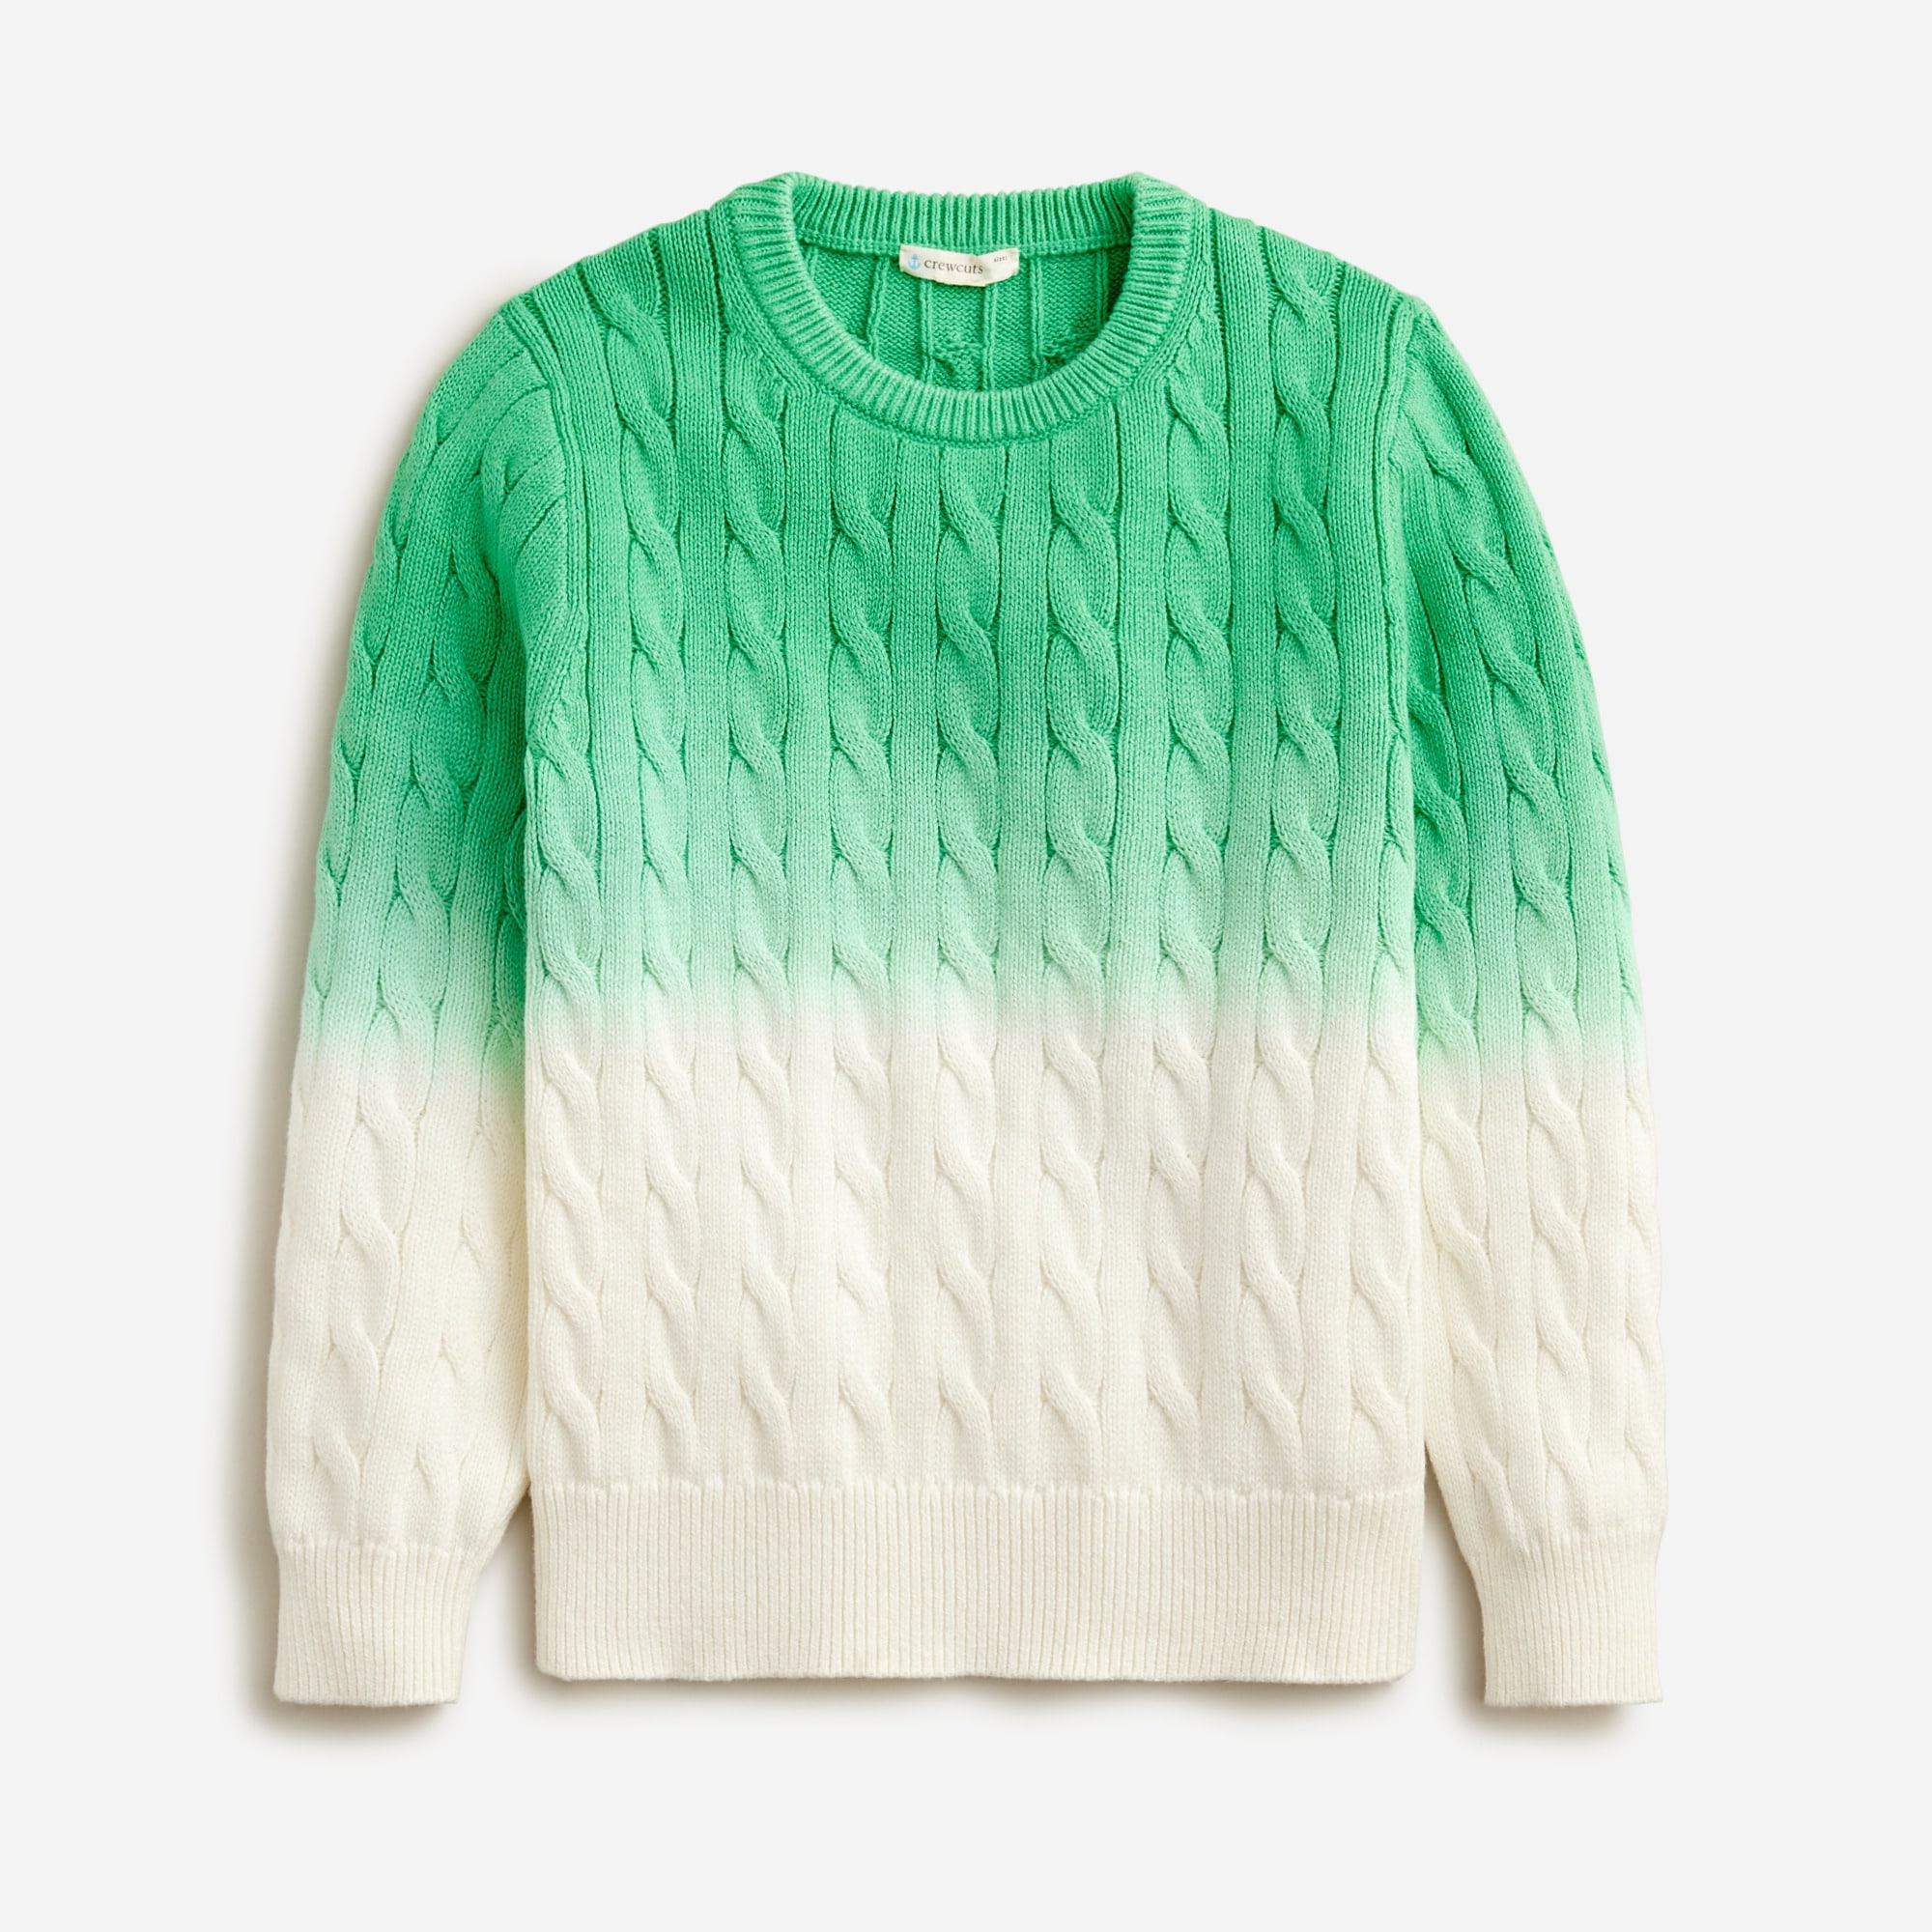 Jcrew Kids dip-dyed cable-knit sweater